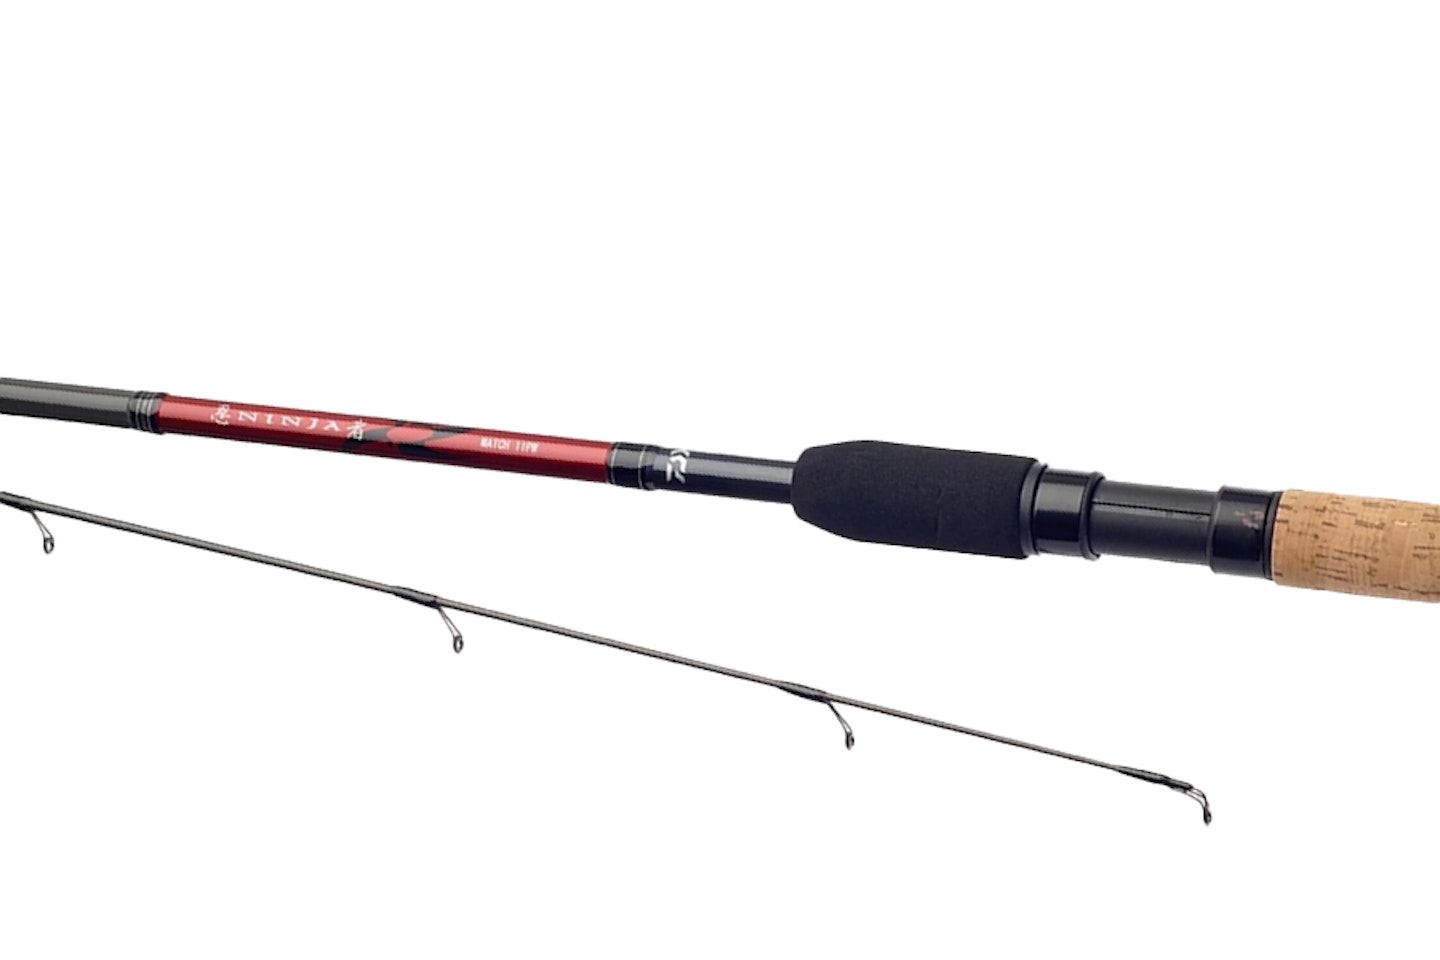 The best pellet waggler rods for all budgets